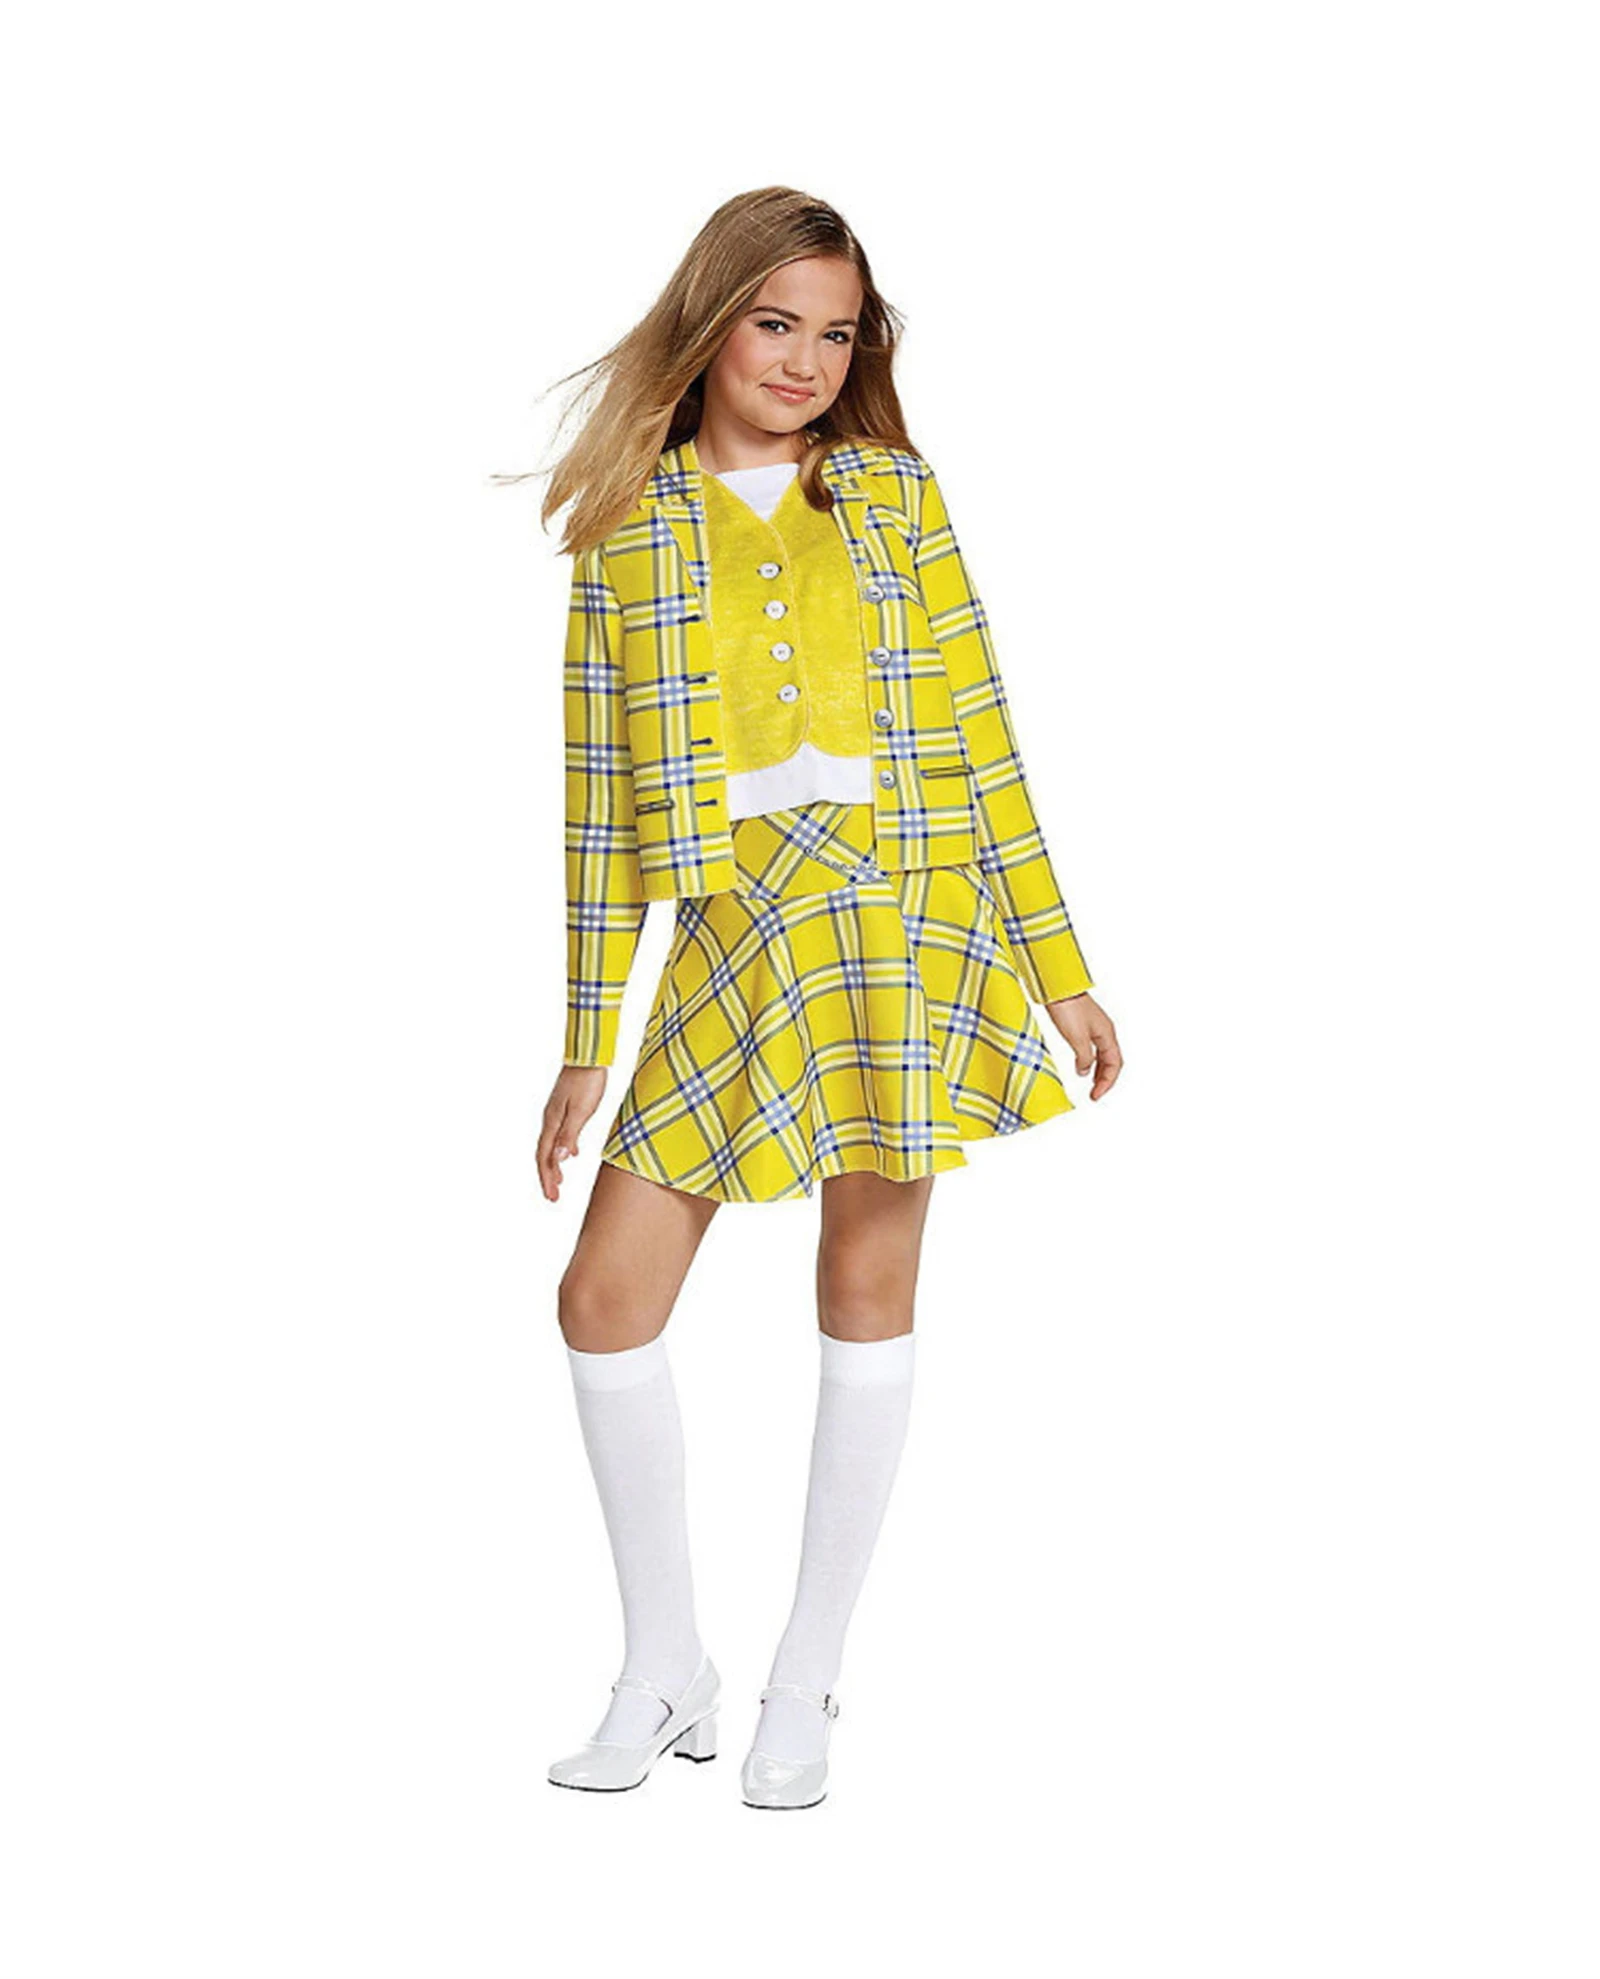 

Teenage Girls Clueless Cher Horowitz Costume 2 Piece Outfit Movie Alicia Silverstone Carnival Birthday Party Plaid Dress Cosplay